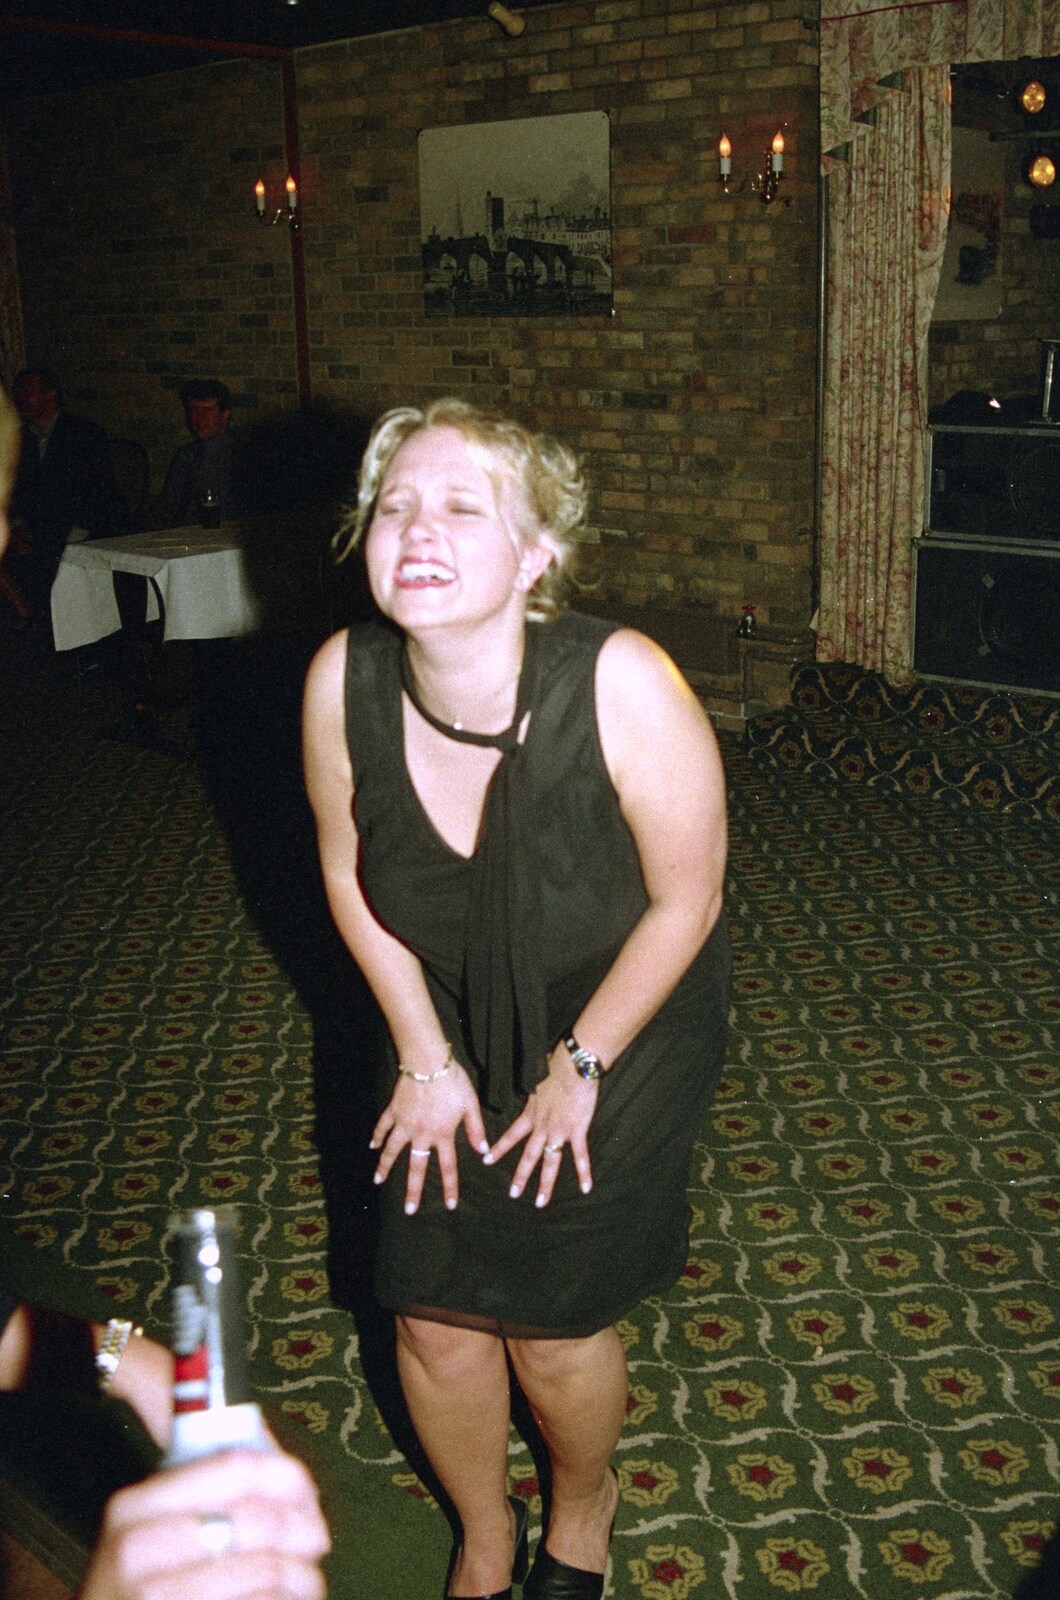 Michelle has a giggle from Paula's 3G Lab Wedding Reception, Huntingdon, Cambridgeshire - 4th September 2000